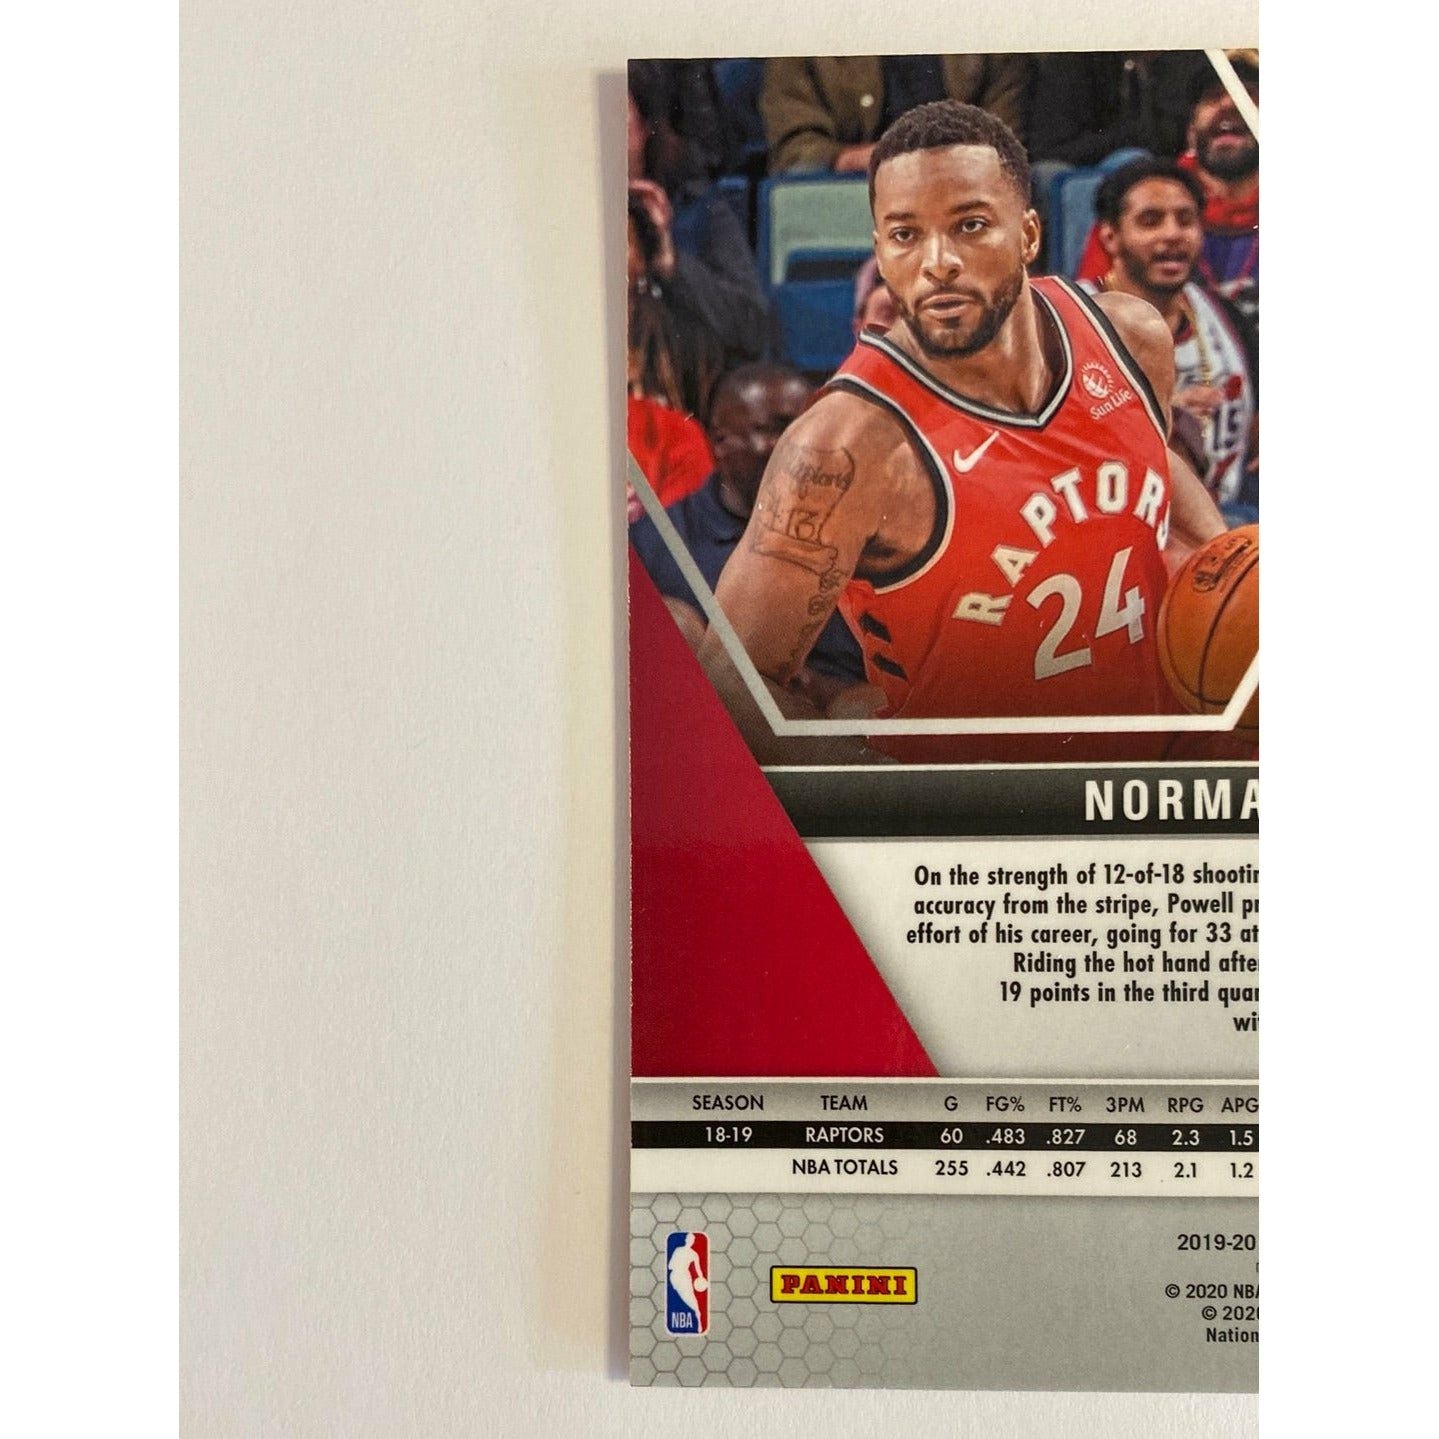  2019-20 Mosaic Norman Powell Orange Reactive Prizm  Local Legends Cards & Collectibles